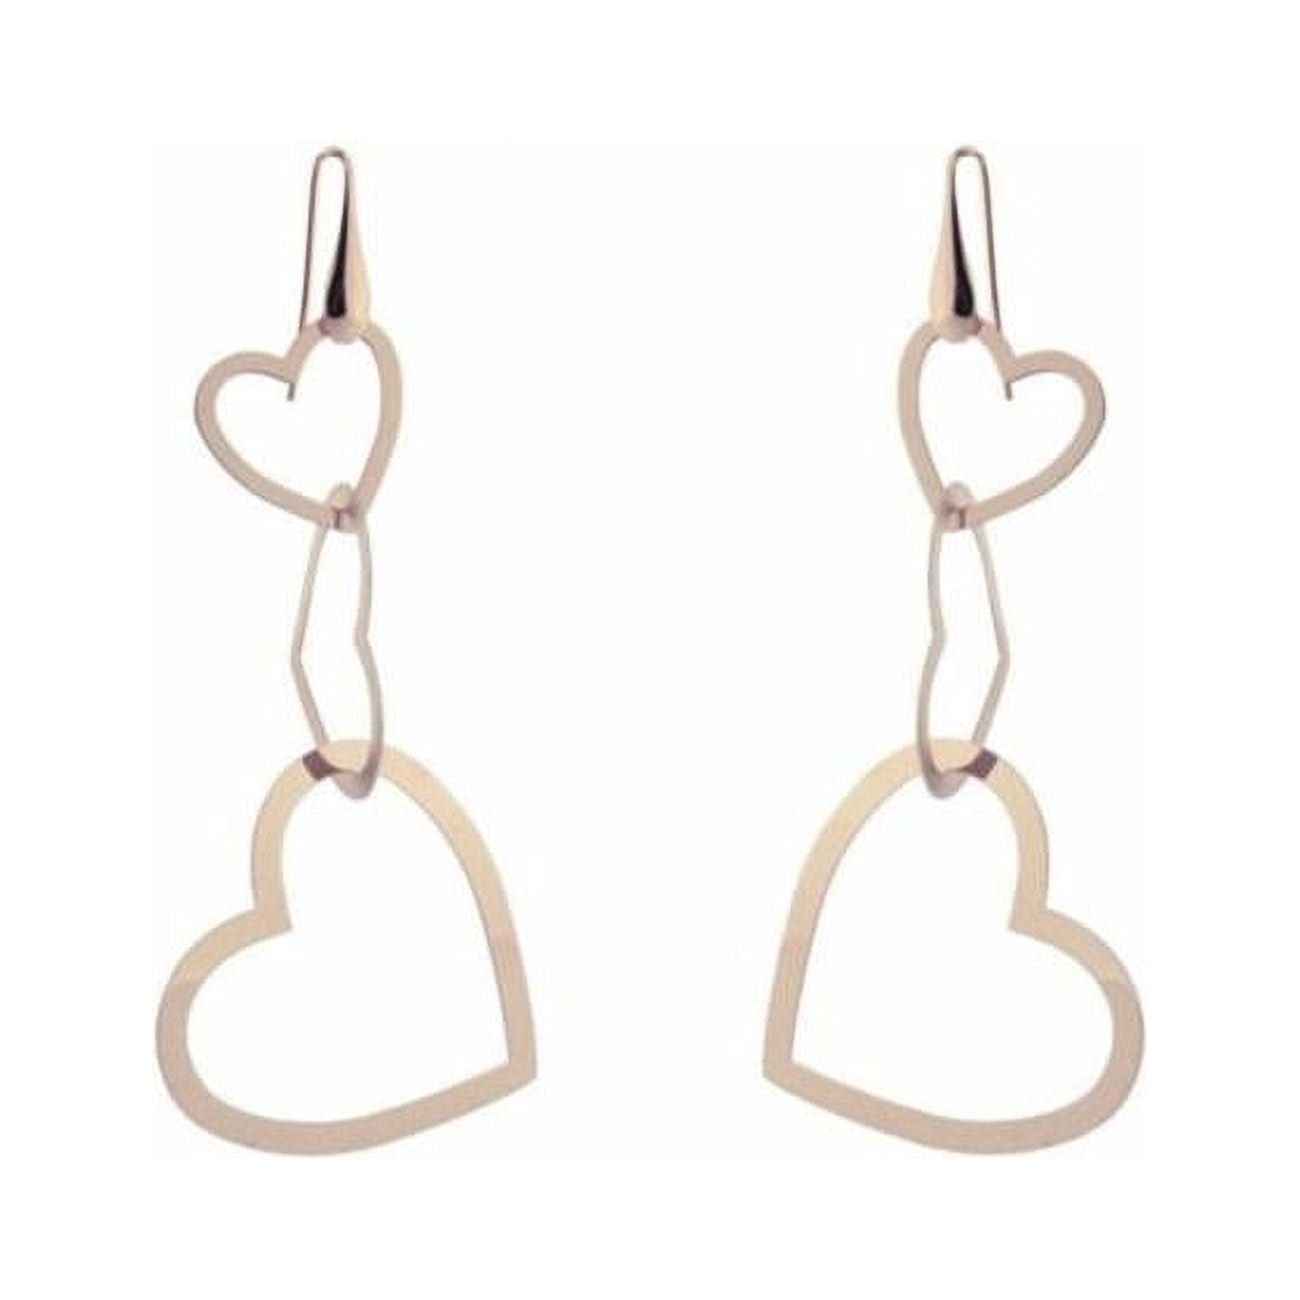 95118p 3 In. Rose Gold Plated Sterling Silver Dangling Silhouette Heart Earrings